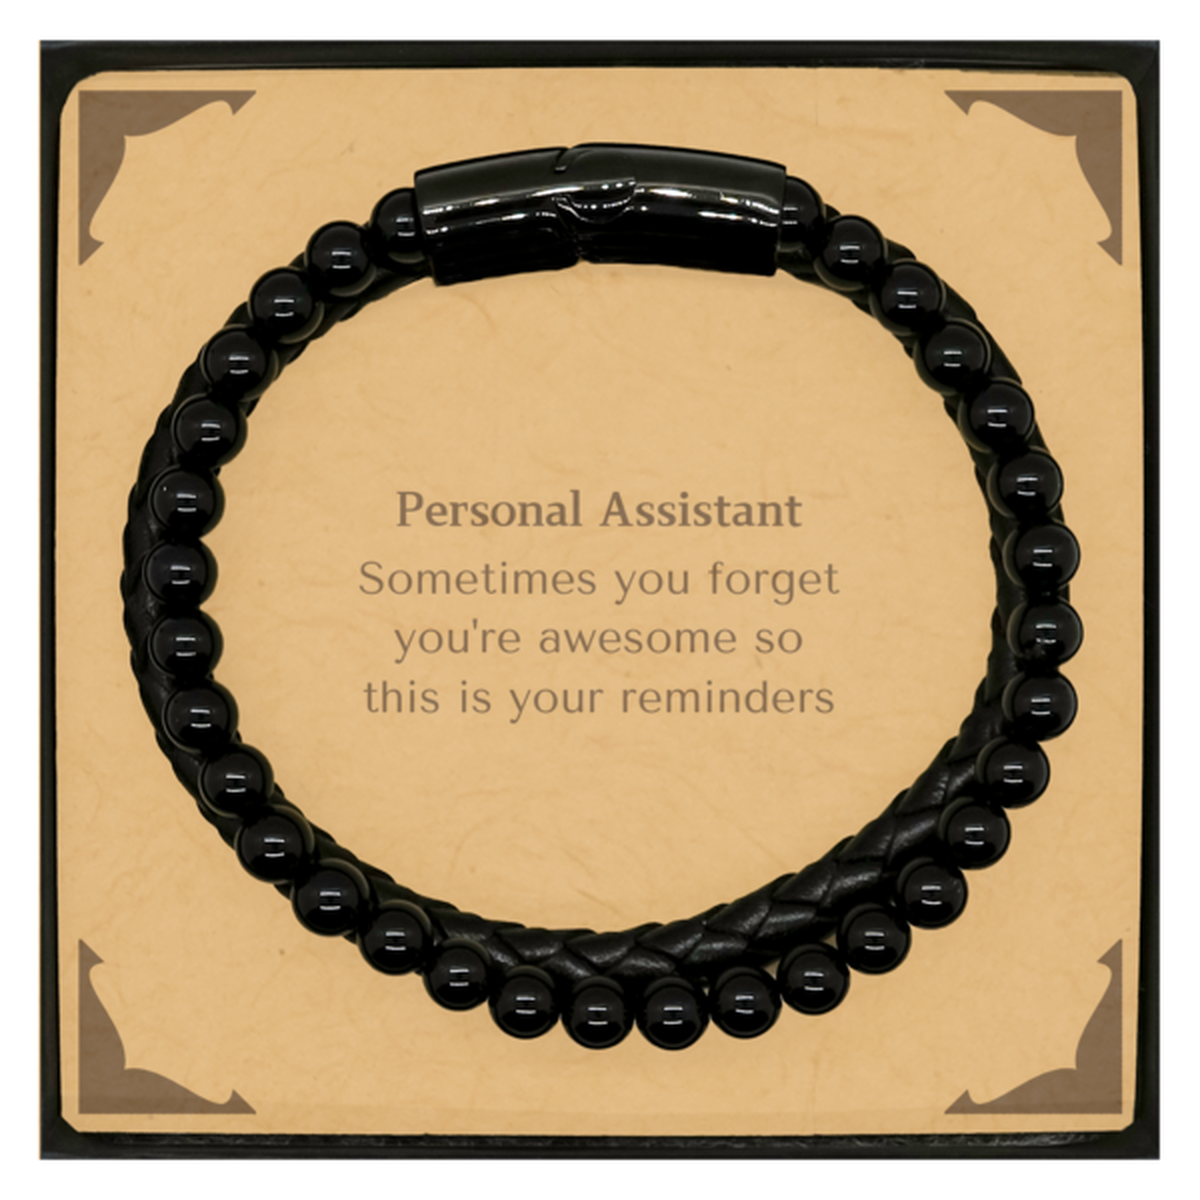 Sentimental Personal Assistant Stone Leather Bracelets, Personal Assistant Sometimes you forget you're awesome so this is your reminders, Graduation Christmas Birthday Gifts for Personal Assistant, Men, Women, Coworkers